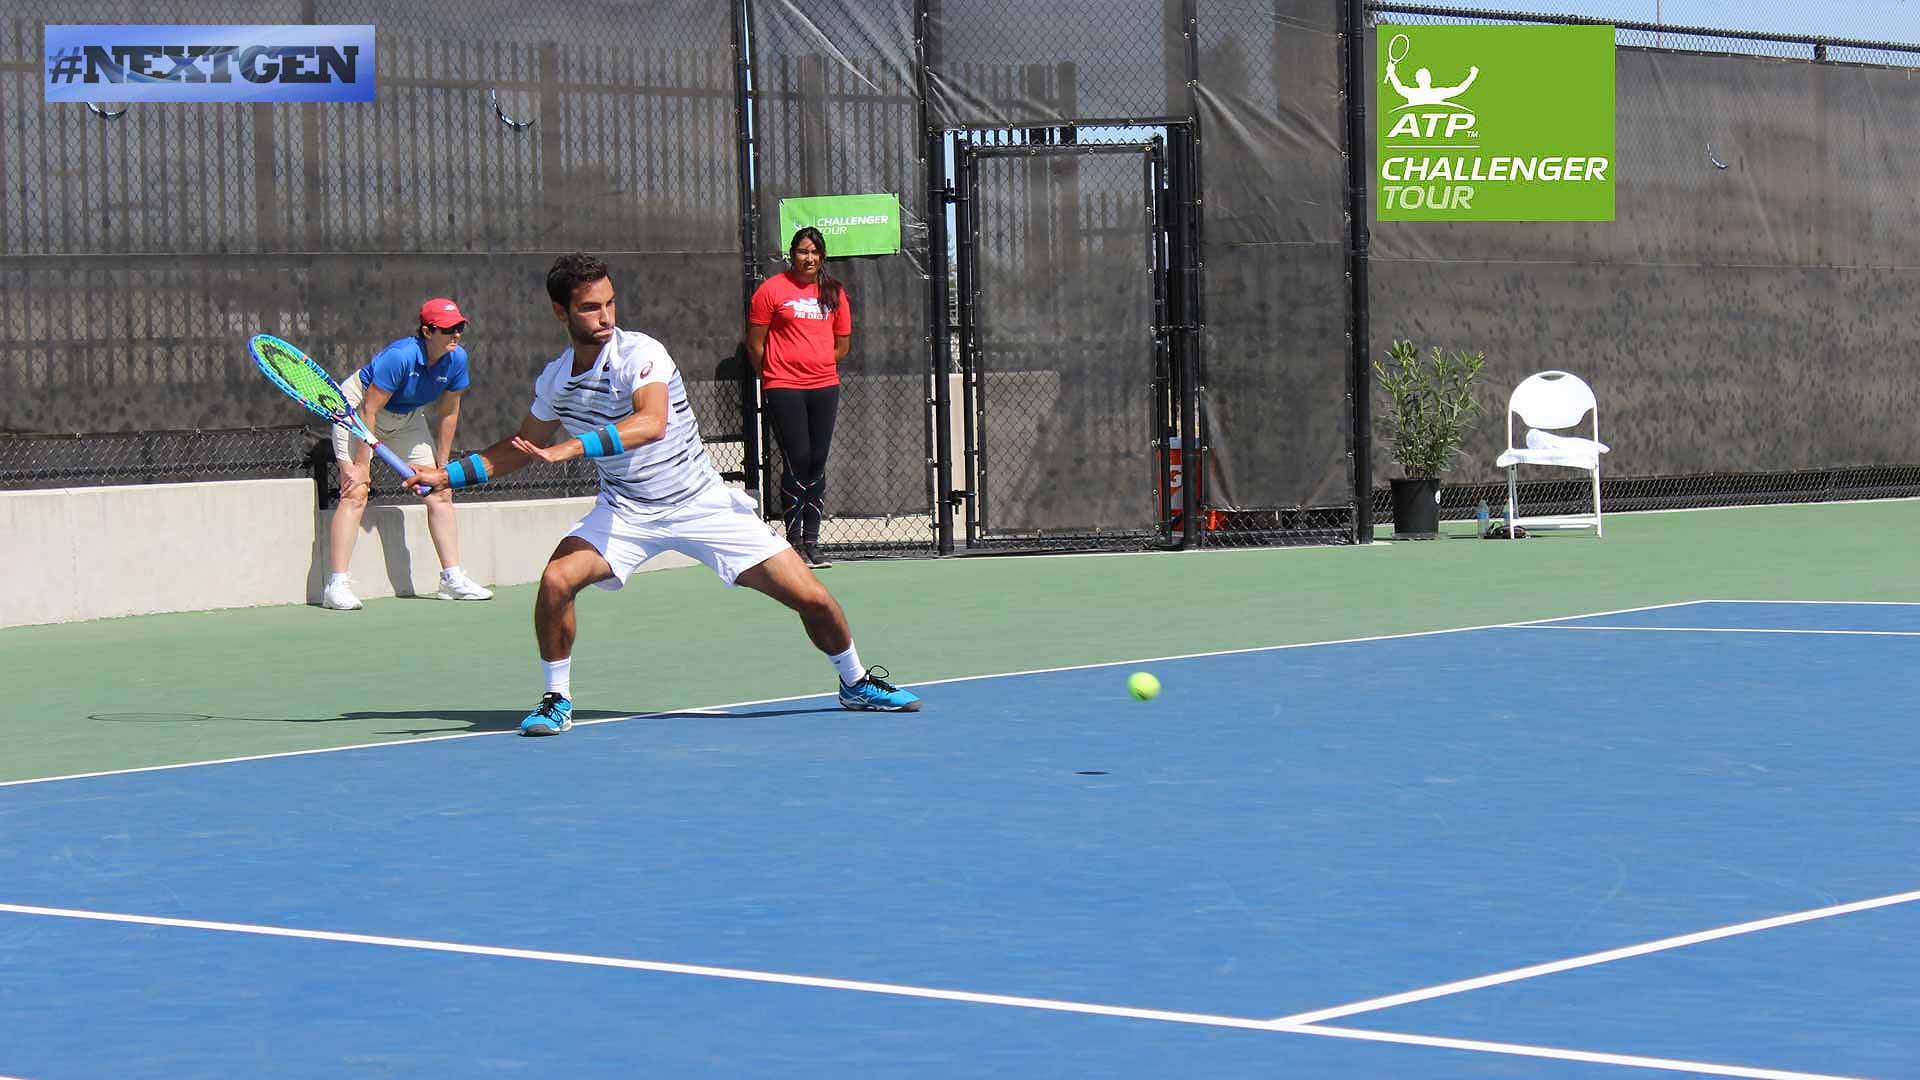 NextGen star Noah Rubin is healthy and playing top tennis at the ATP Challenger Tour event in Stockton.